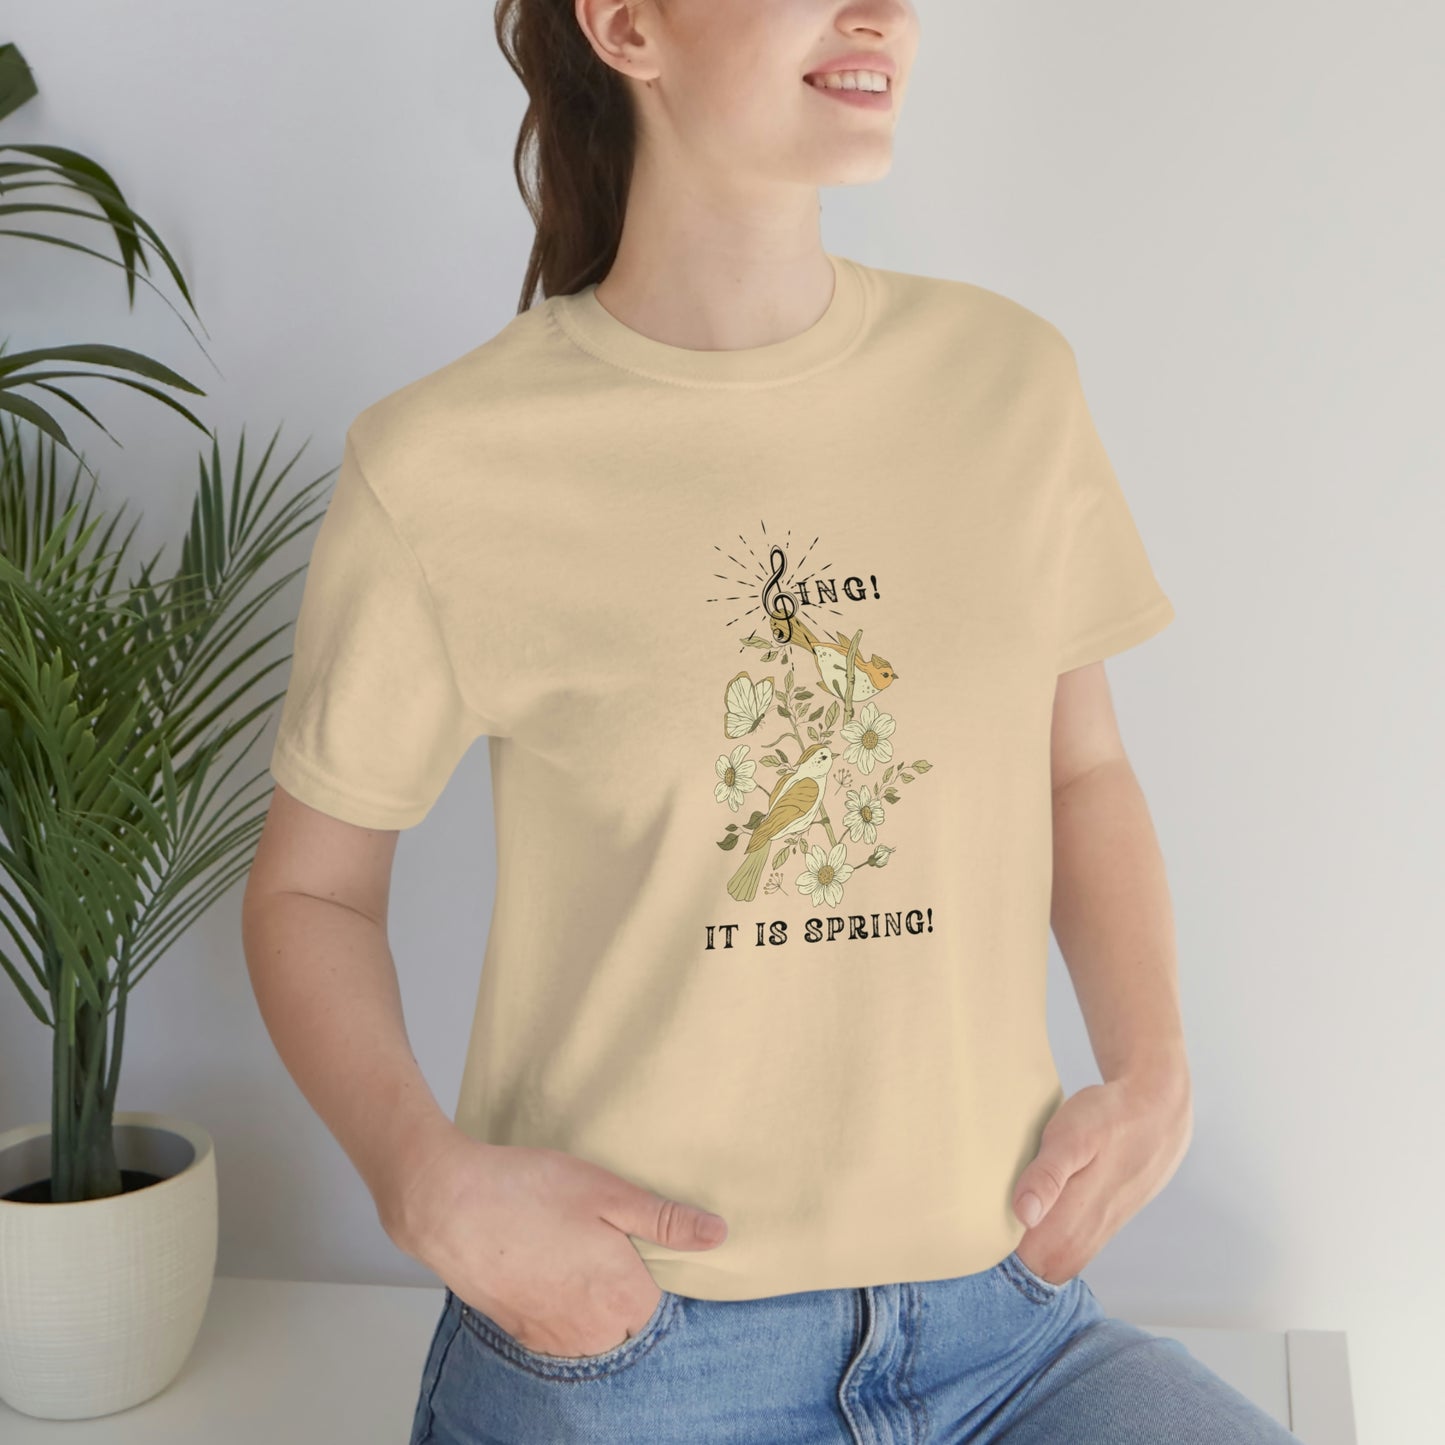 SING IT IS SPRING UNISEX  CREW NECK T SHIRT GIFT WITH BLACK FONT